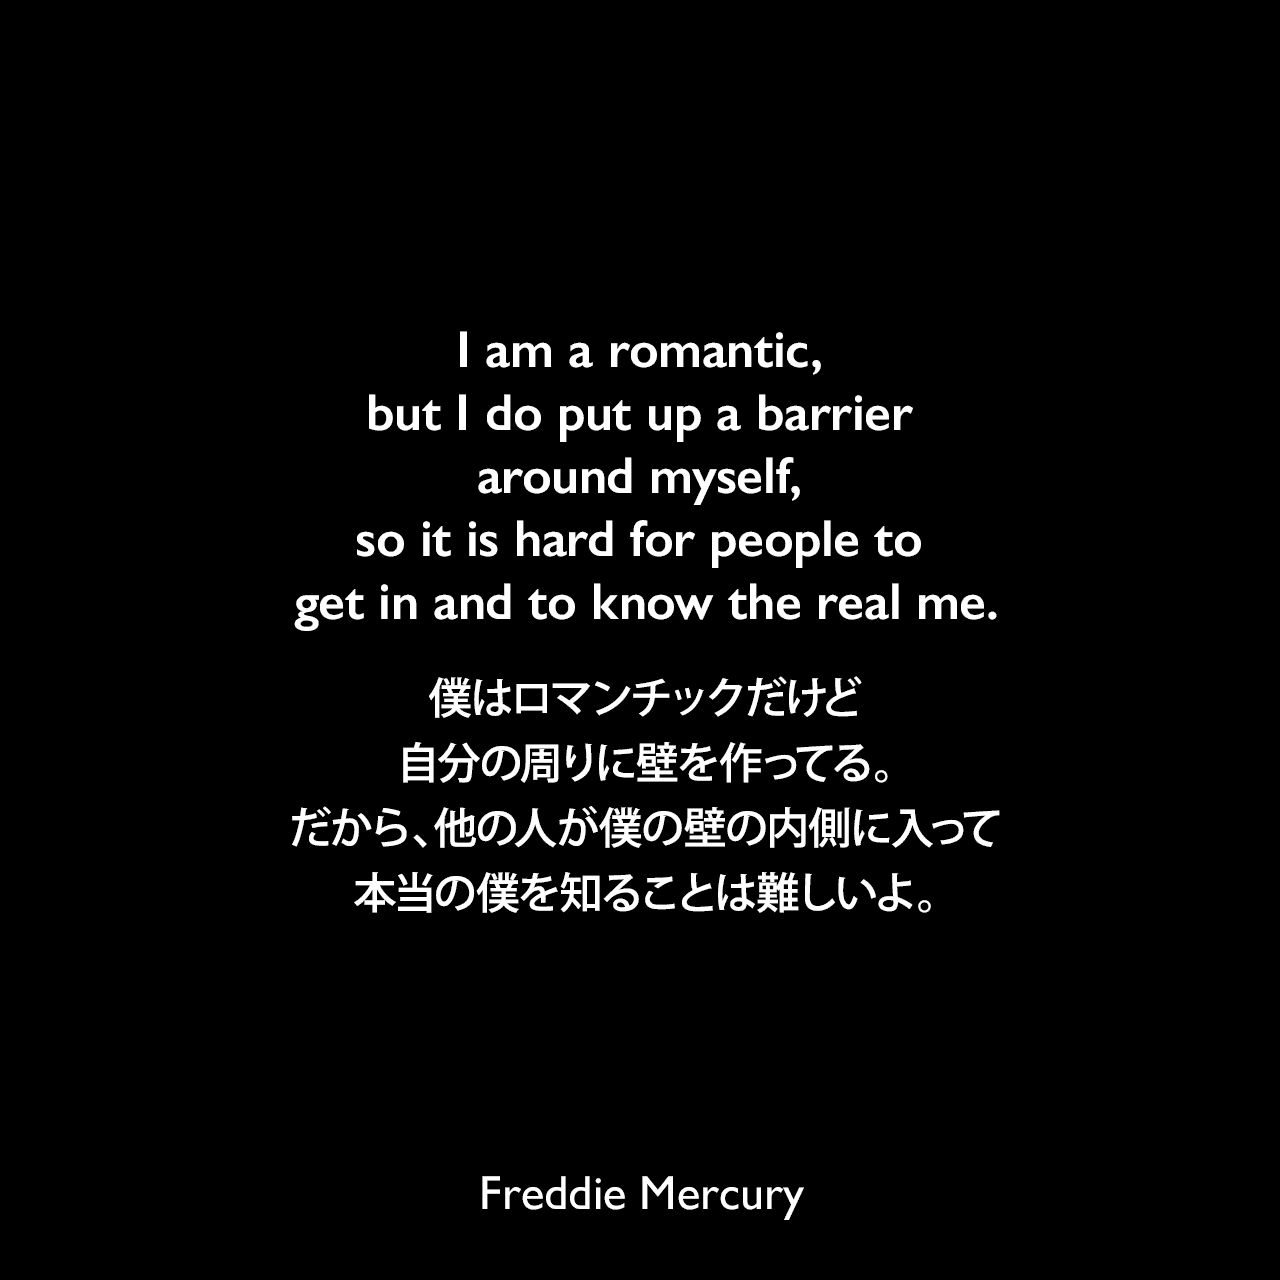 I am a romantic, but I do put up a barrier around myself, so it is hard for people to get in and to know the real me.僕はロマンチックだけど、自分の周りに壁を作ってる。だから、他の人が僕の壁の内側に入って、本当の僕を知ることは難しいよ。Freddie Mercury